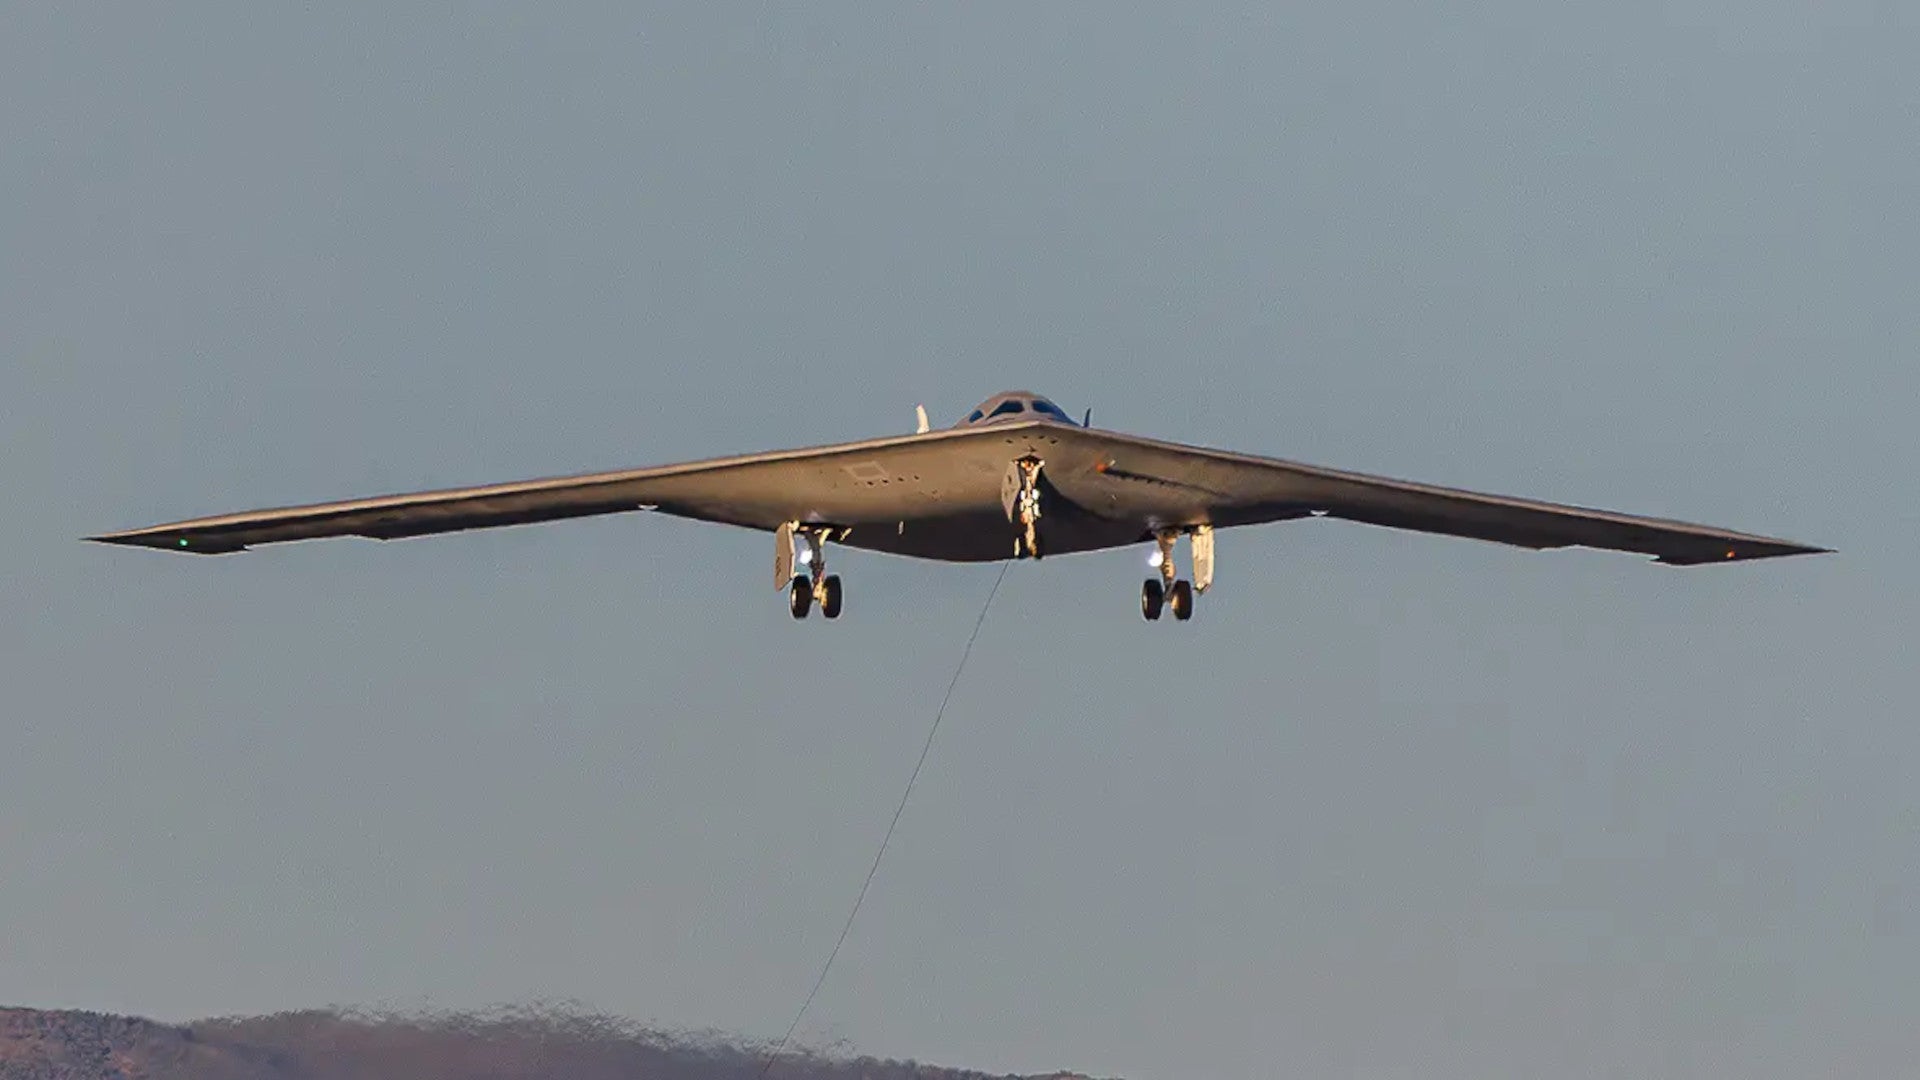 b-21 raider now in production just two months after first flight